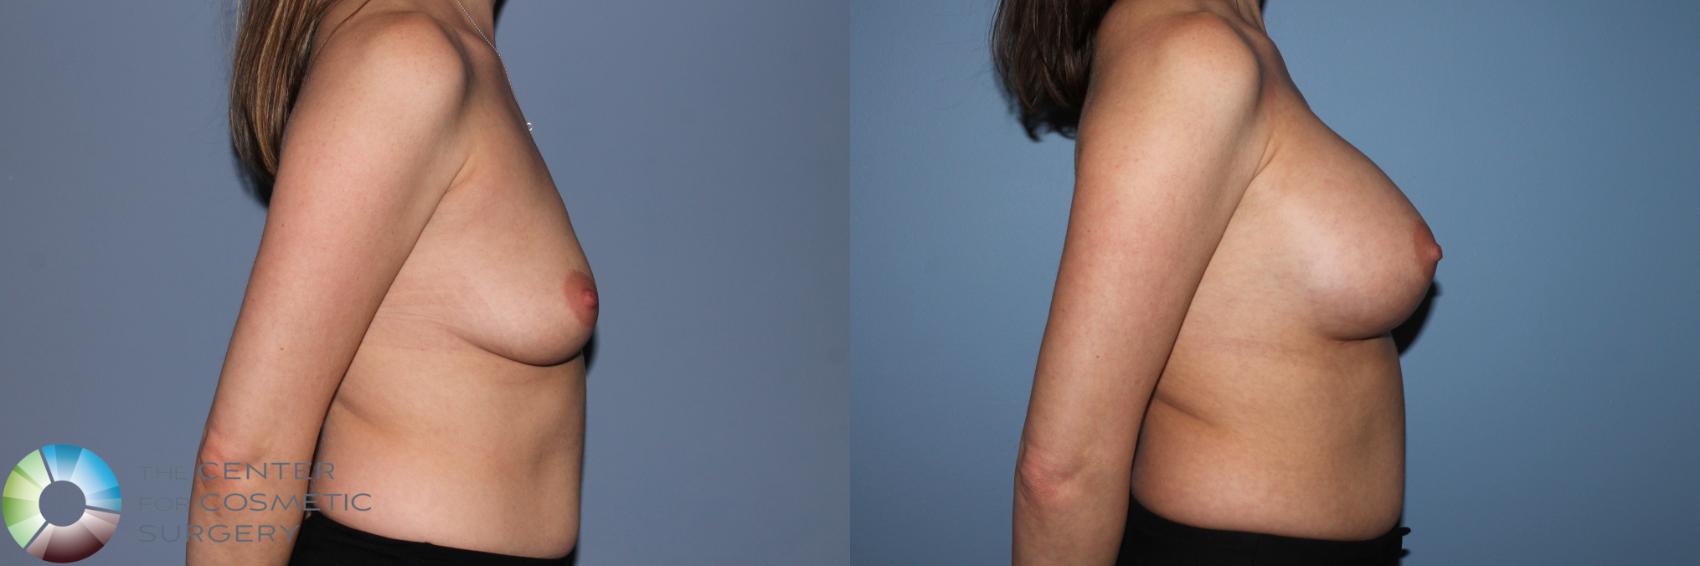 Before & After Breast Augmentation Case 11552 Right Side View in Golden, CO